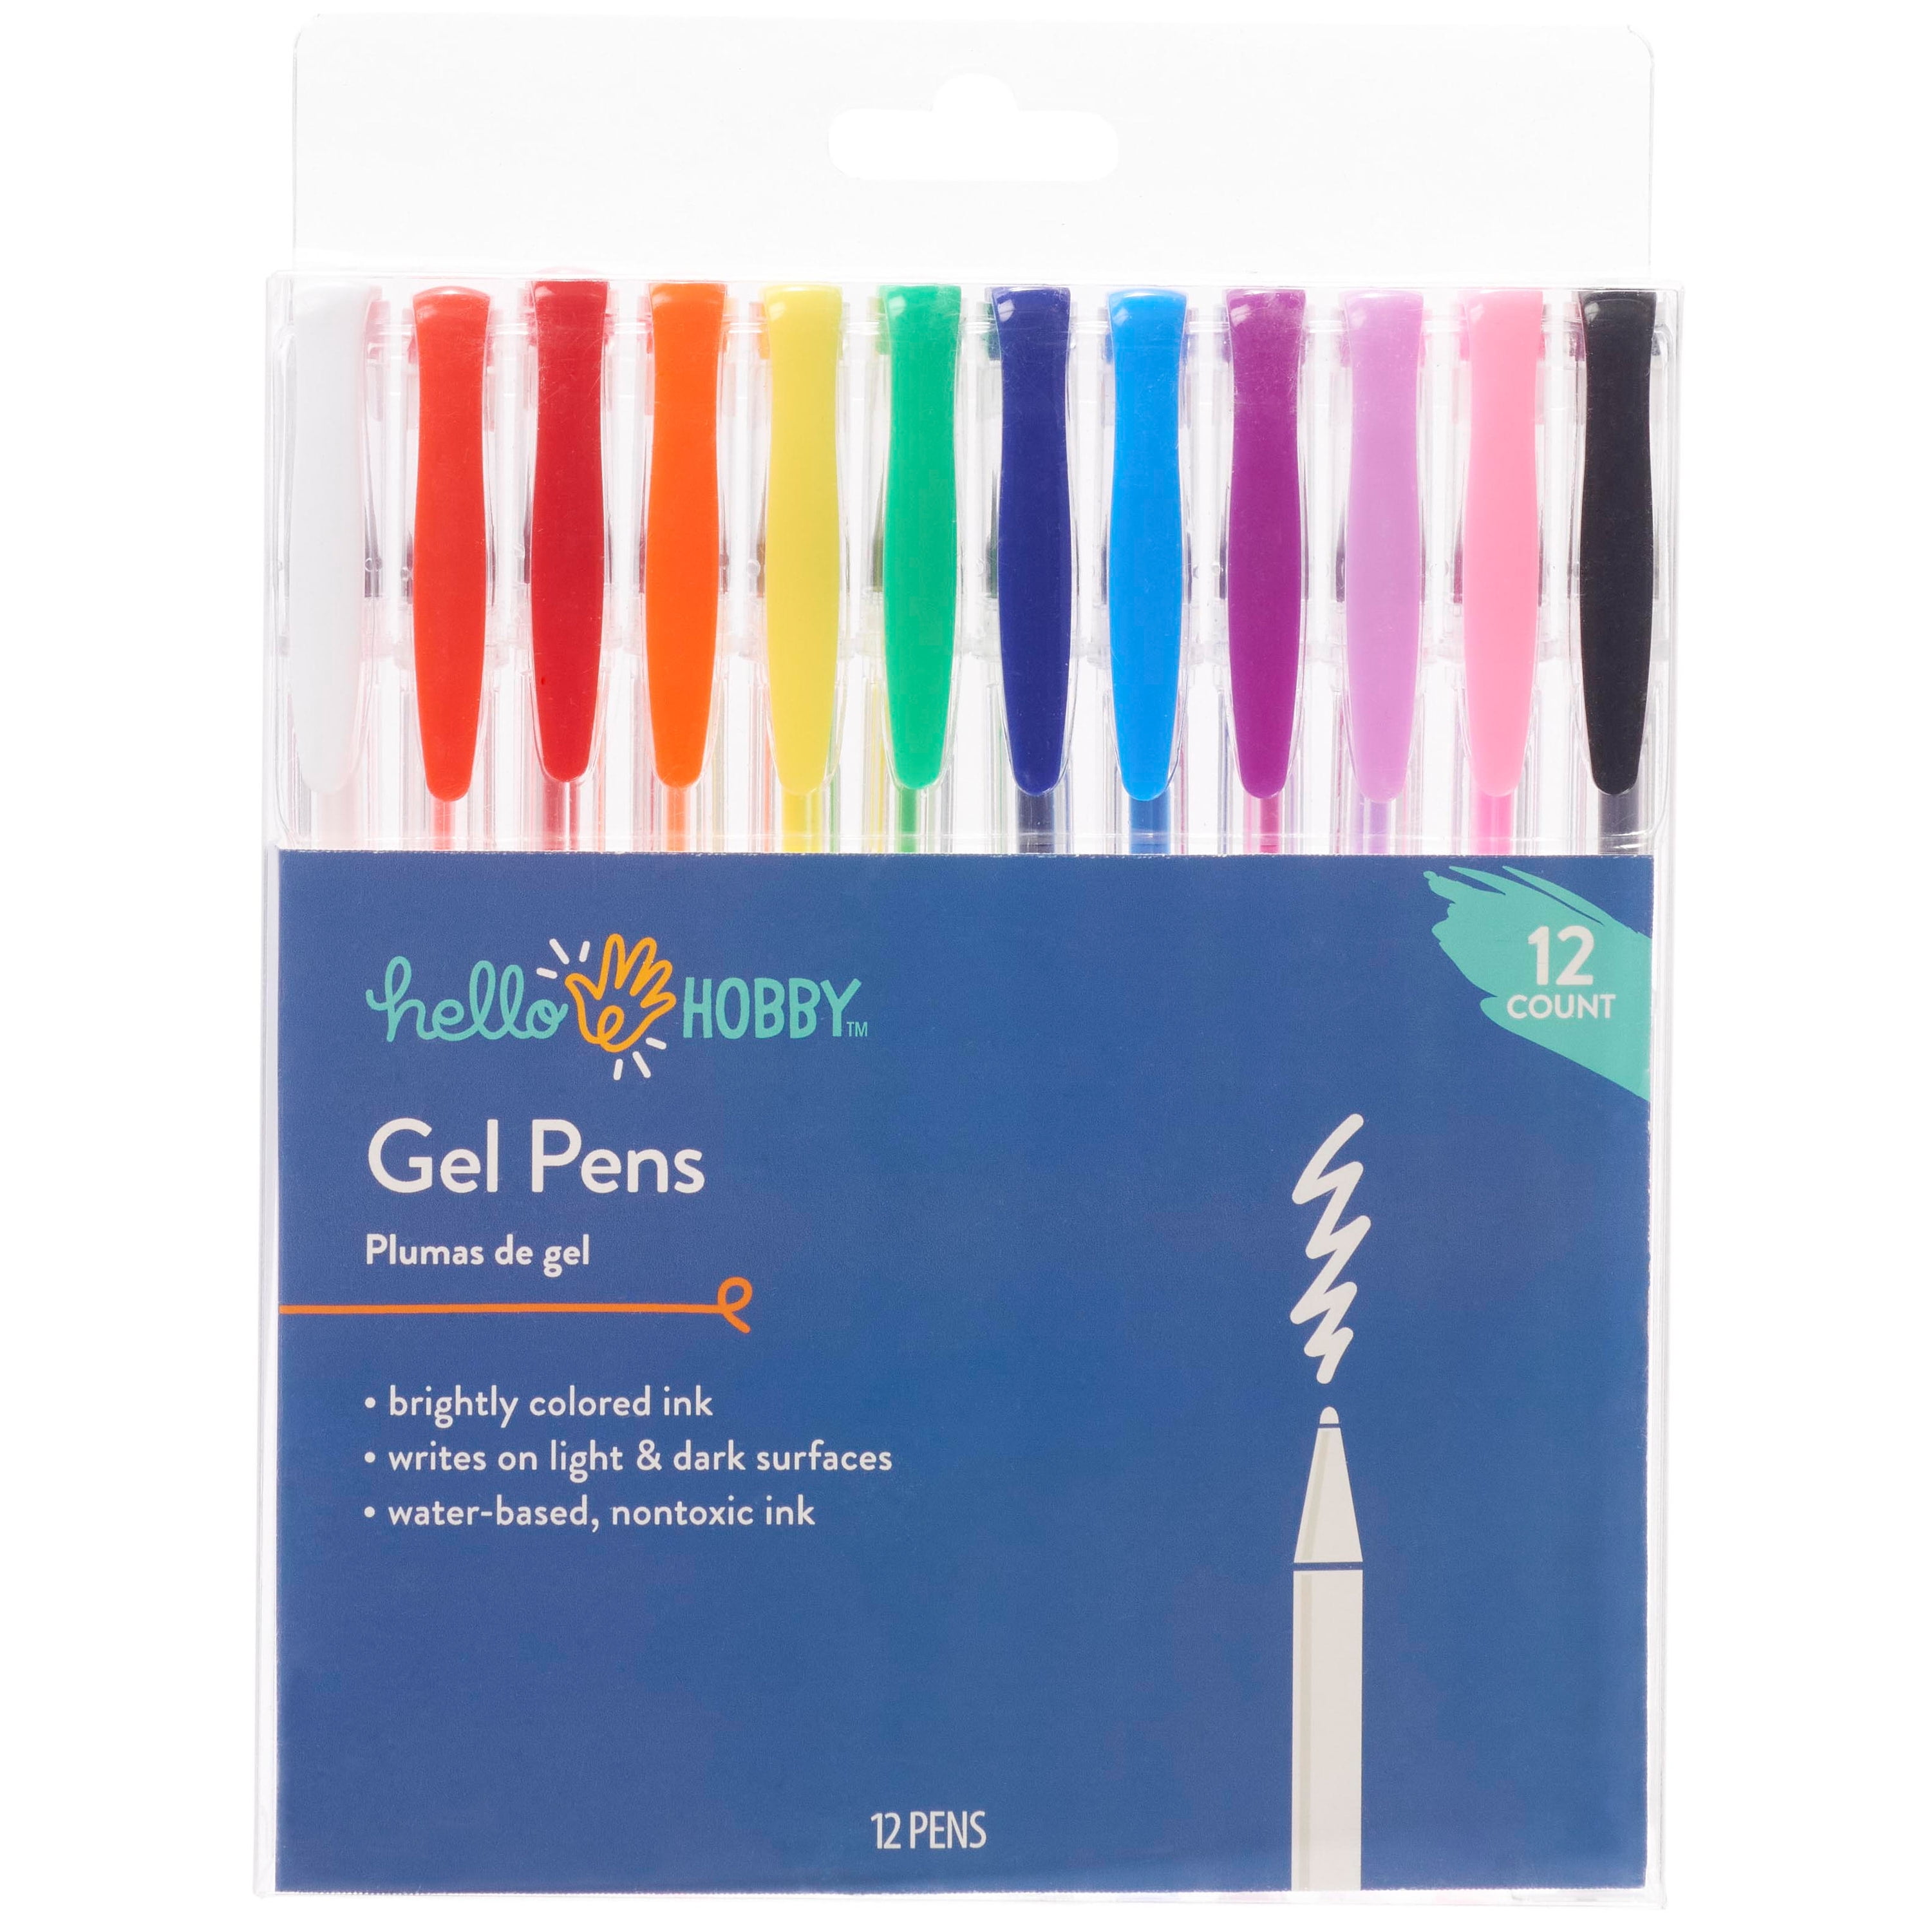  ARTEZA Retractable Gel Pens, Quick-Drying Black Ink, 0.7mm  Medium Point, 24 Pack, Perfect for Smooth Writing, Note-Taking, College  School Supplies, Business Supplies, Office Essentials, and Journaling :  Office Products